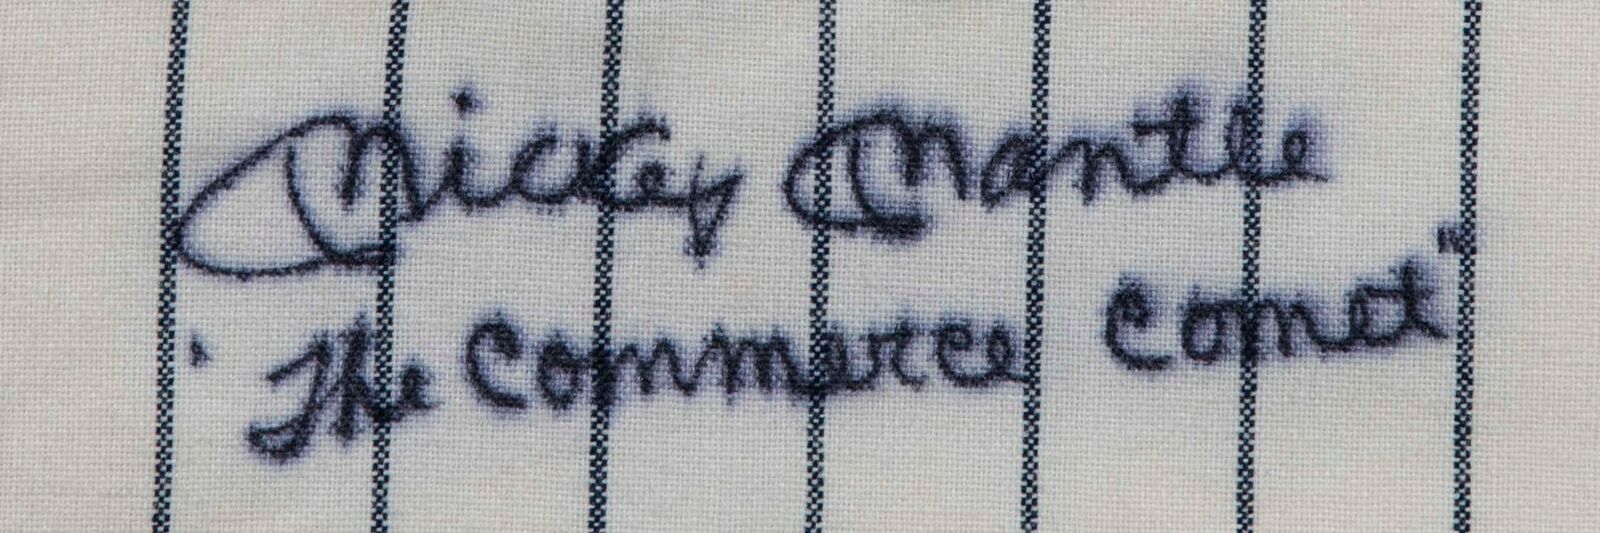 Beautiful Mickey Mantle "The Commerce Comet" Signed New York Yankees Jersey JSA